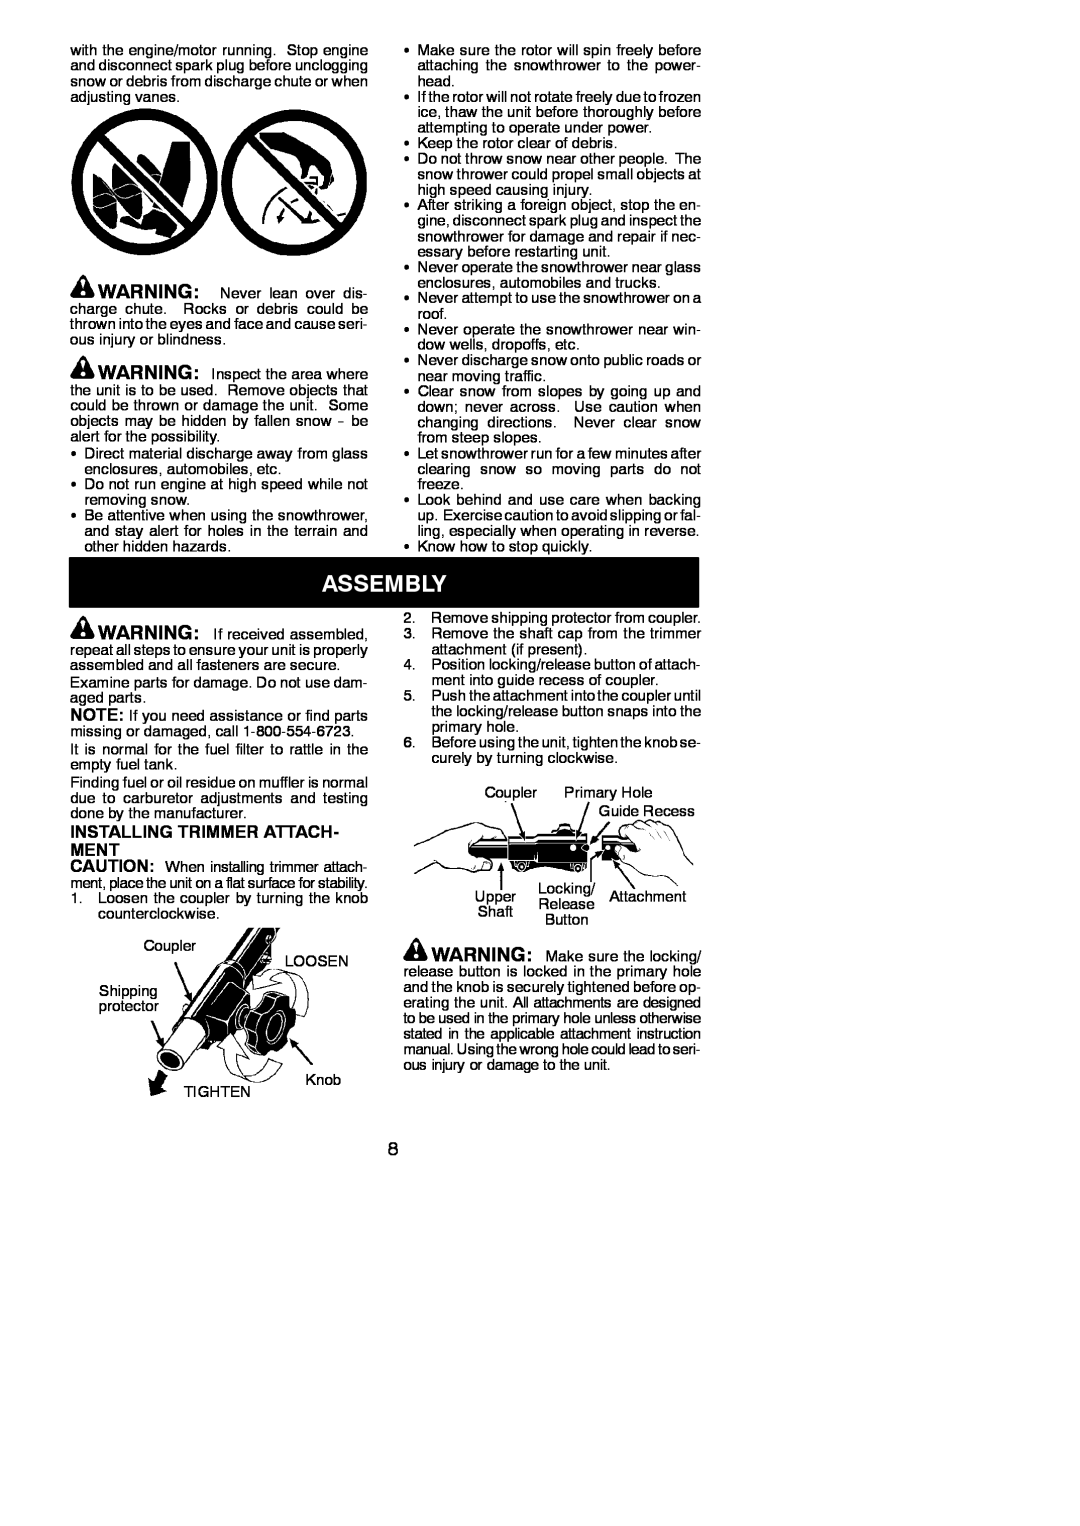 Poulan 545177327 instruction manual Assembly, Installing Trimmer Attach- Ment 